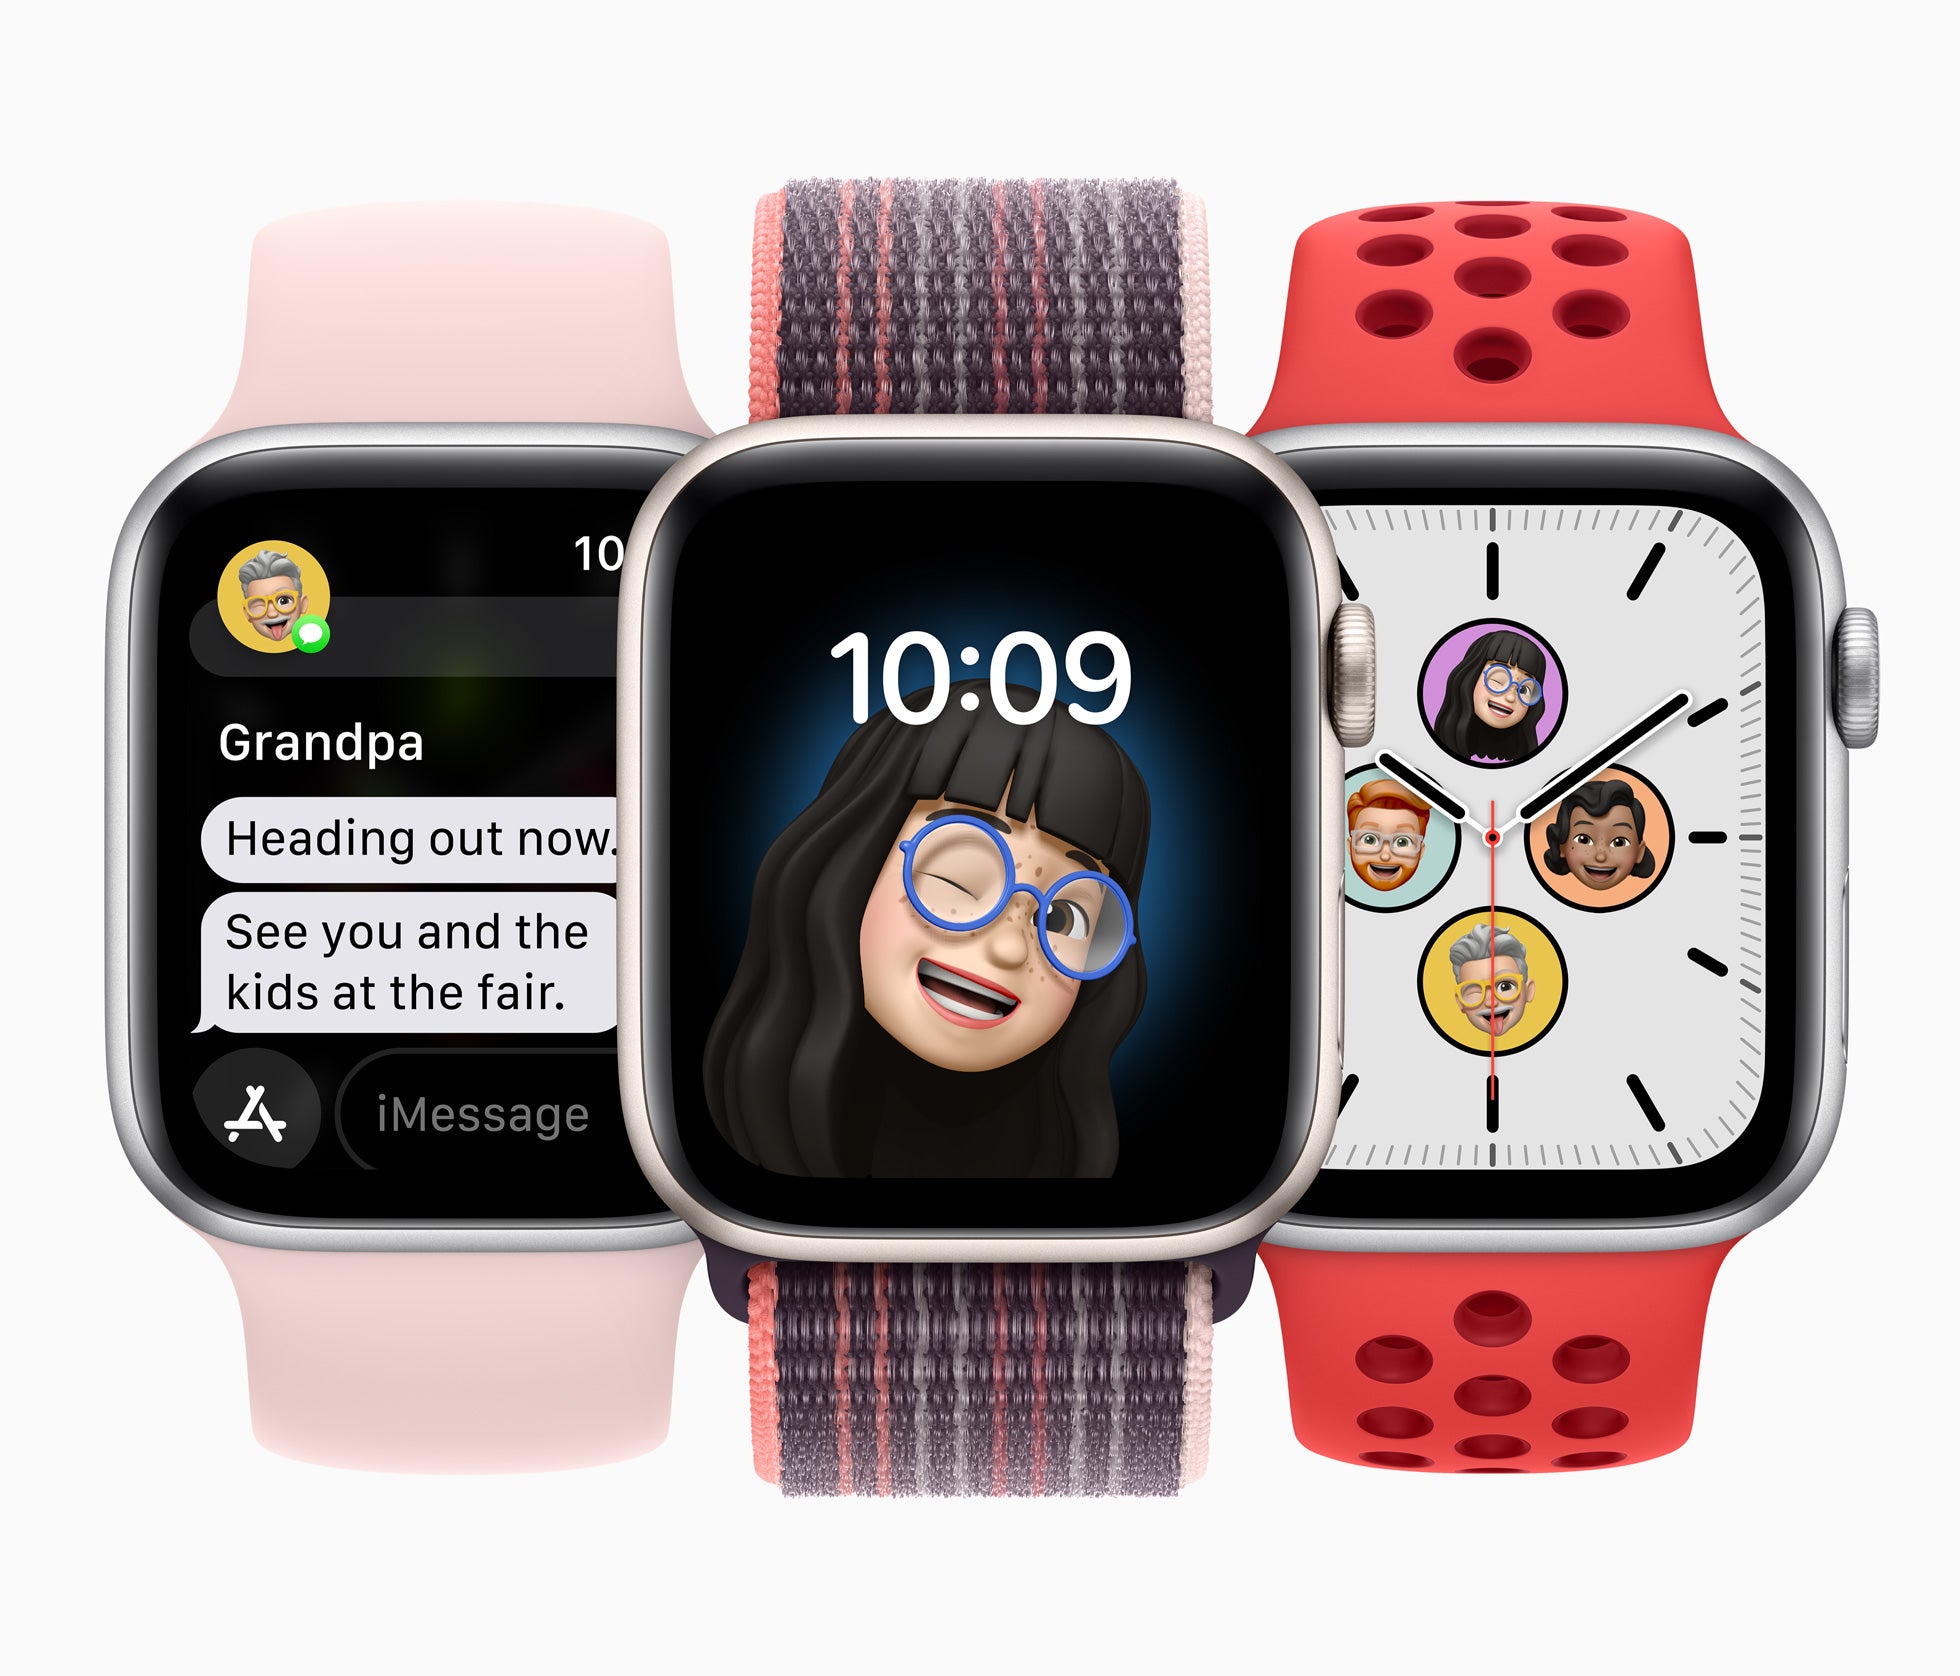 Apple Watches in pink, plaid and red.